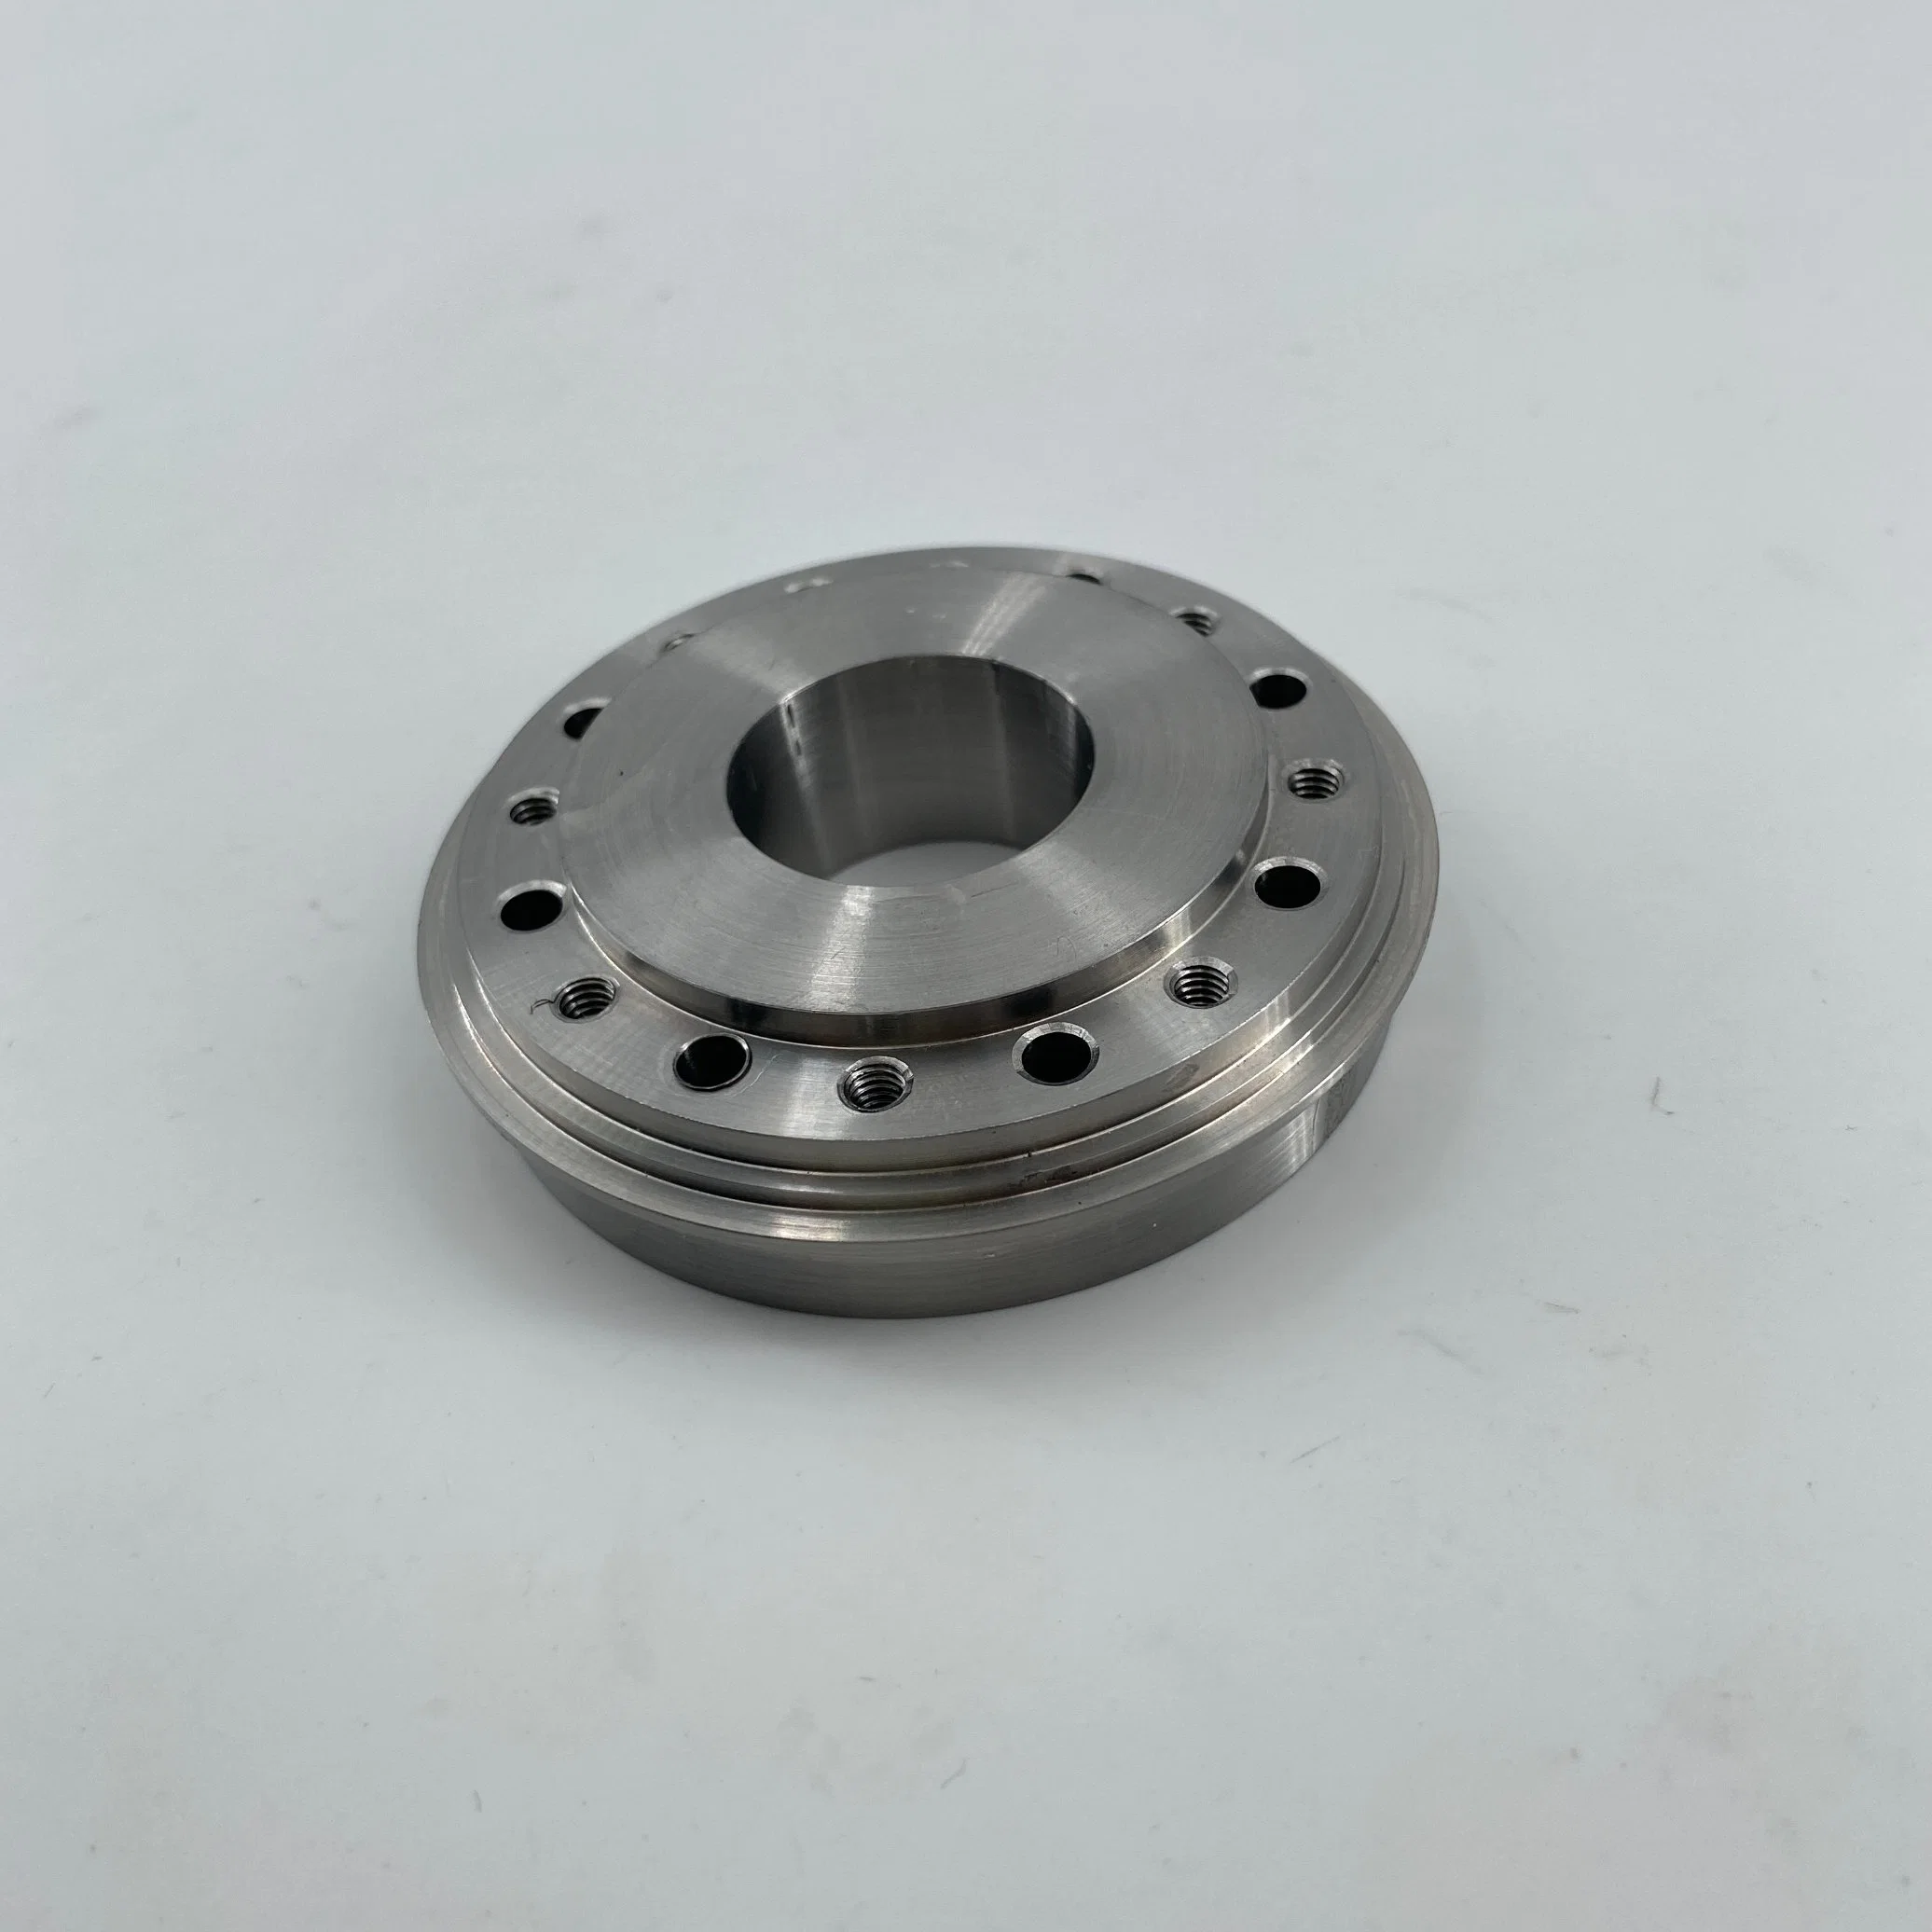 High quality/High cost performance  China CNC Part Supplier Excellent CNC Service Provide Free Sample Precision CNC Machining Parts